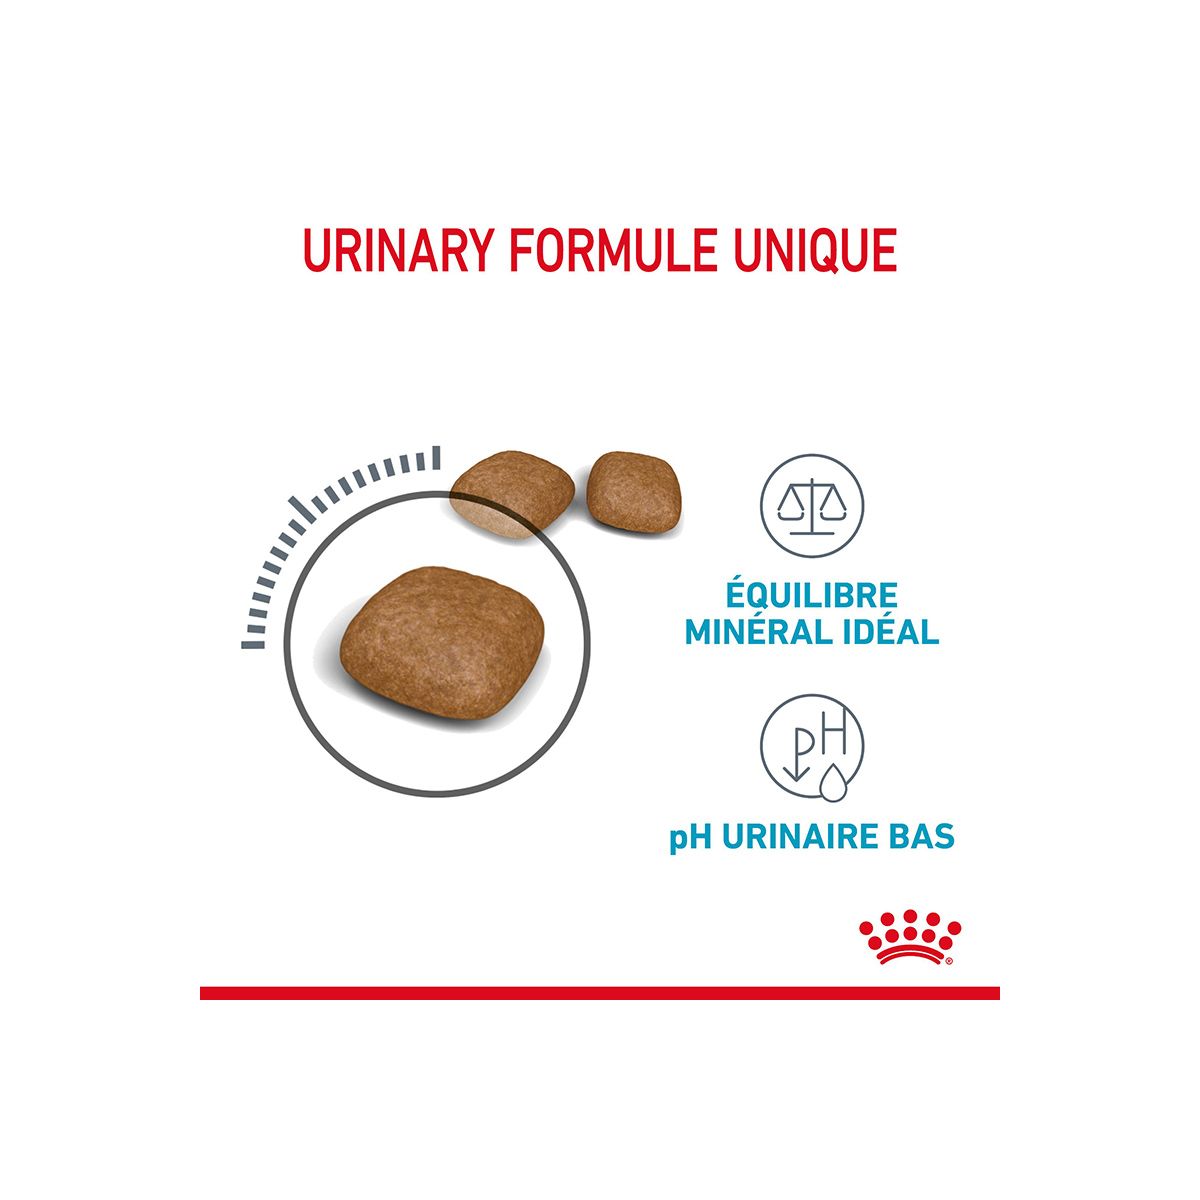 Aliment pour chat Royal Canin Urinary 10kg